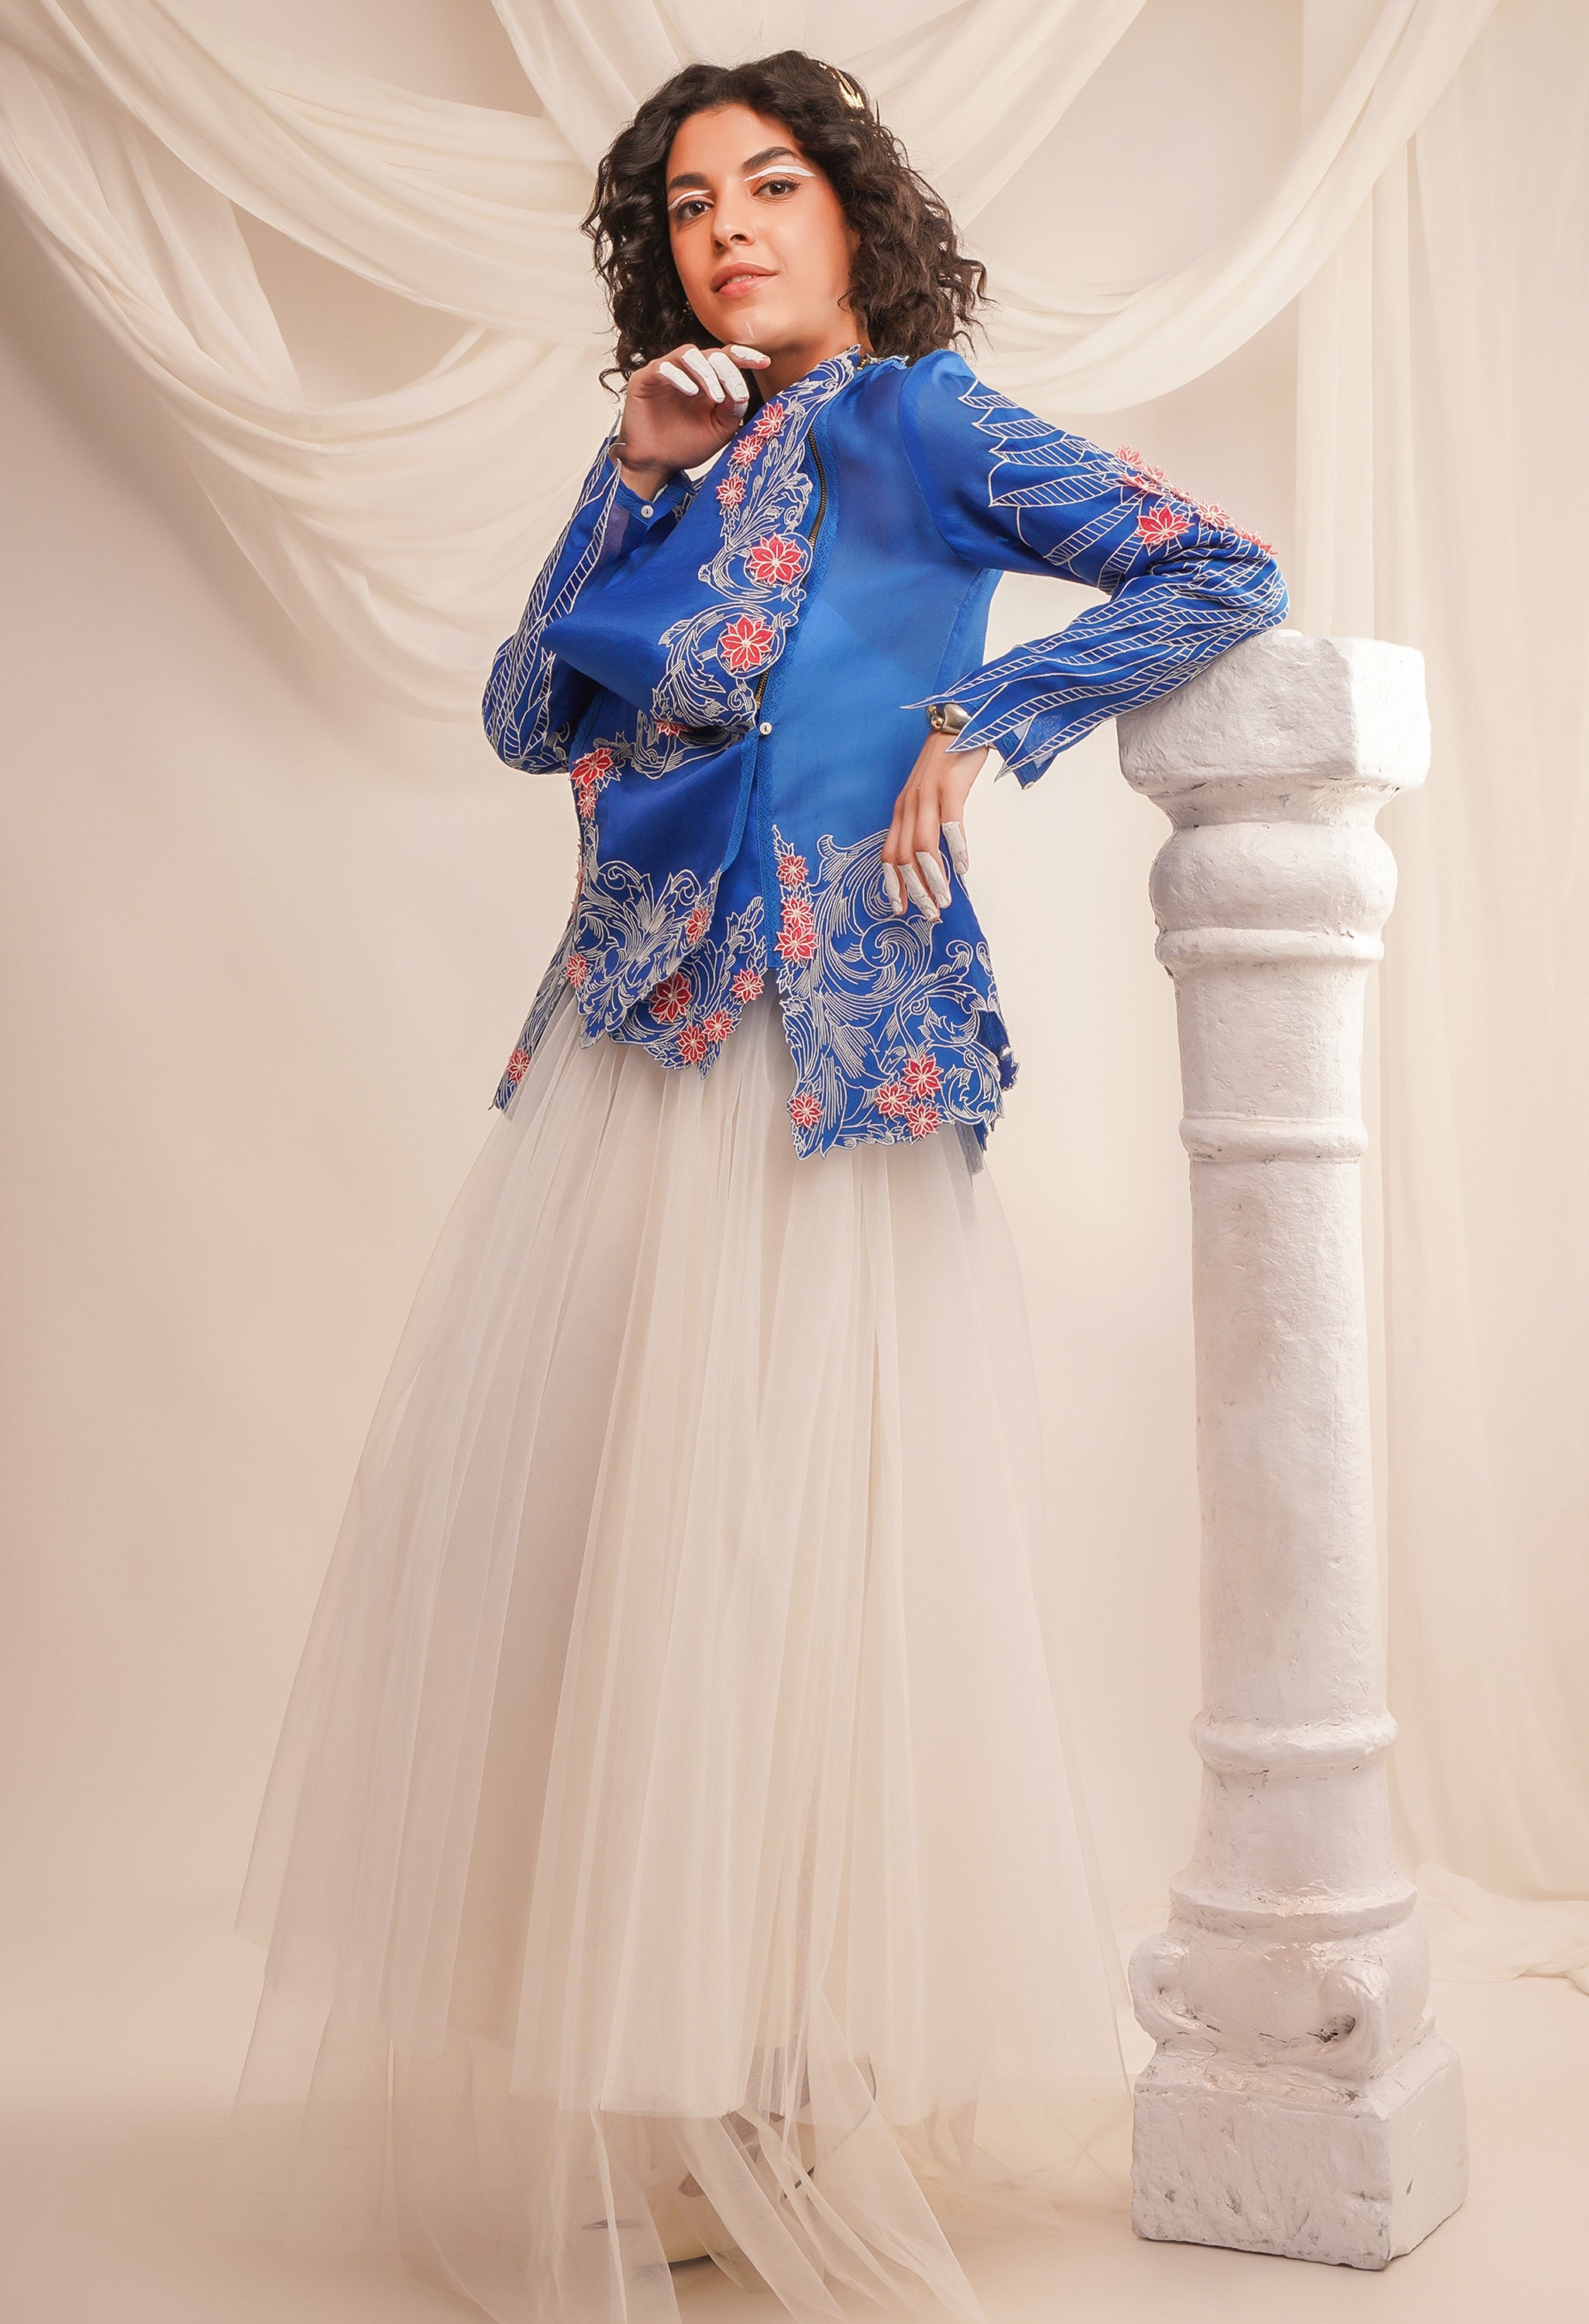 EMB COWL NECK ORGANZA JACKET WITH WING DETAILING ON THE SLEEVES